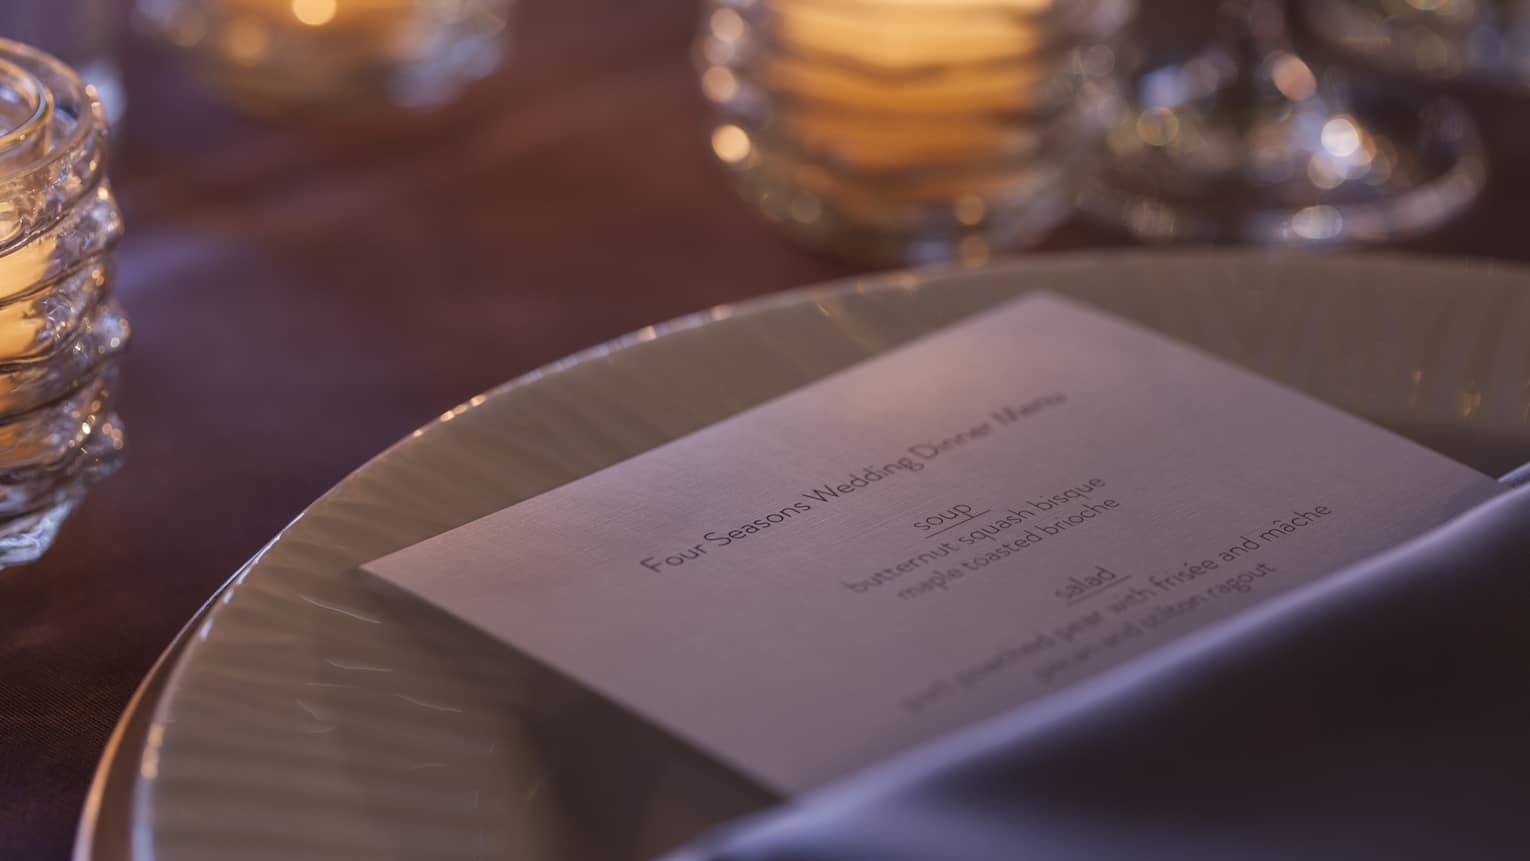 Close-up of wedding menu on dining plate near glowing candles